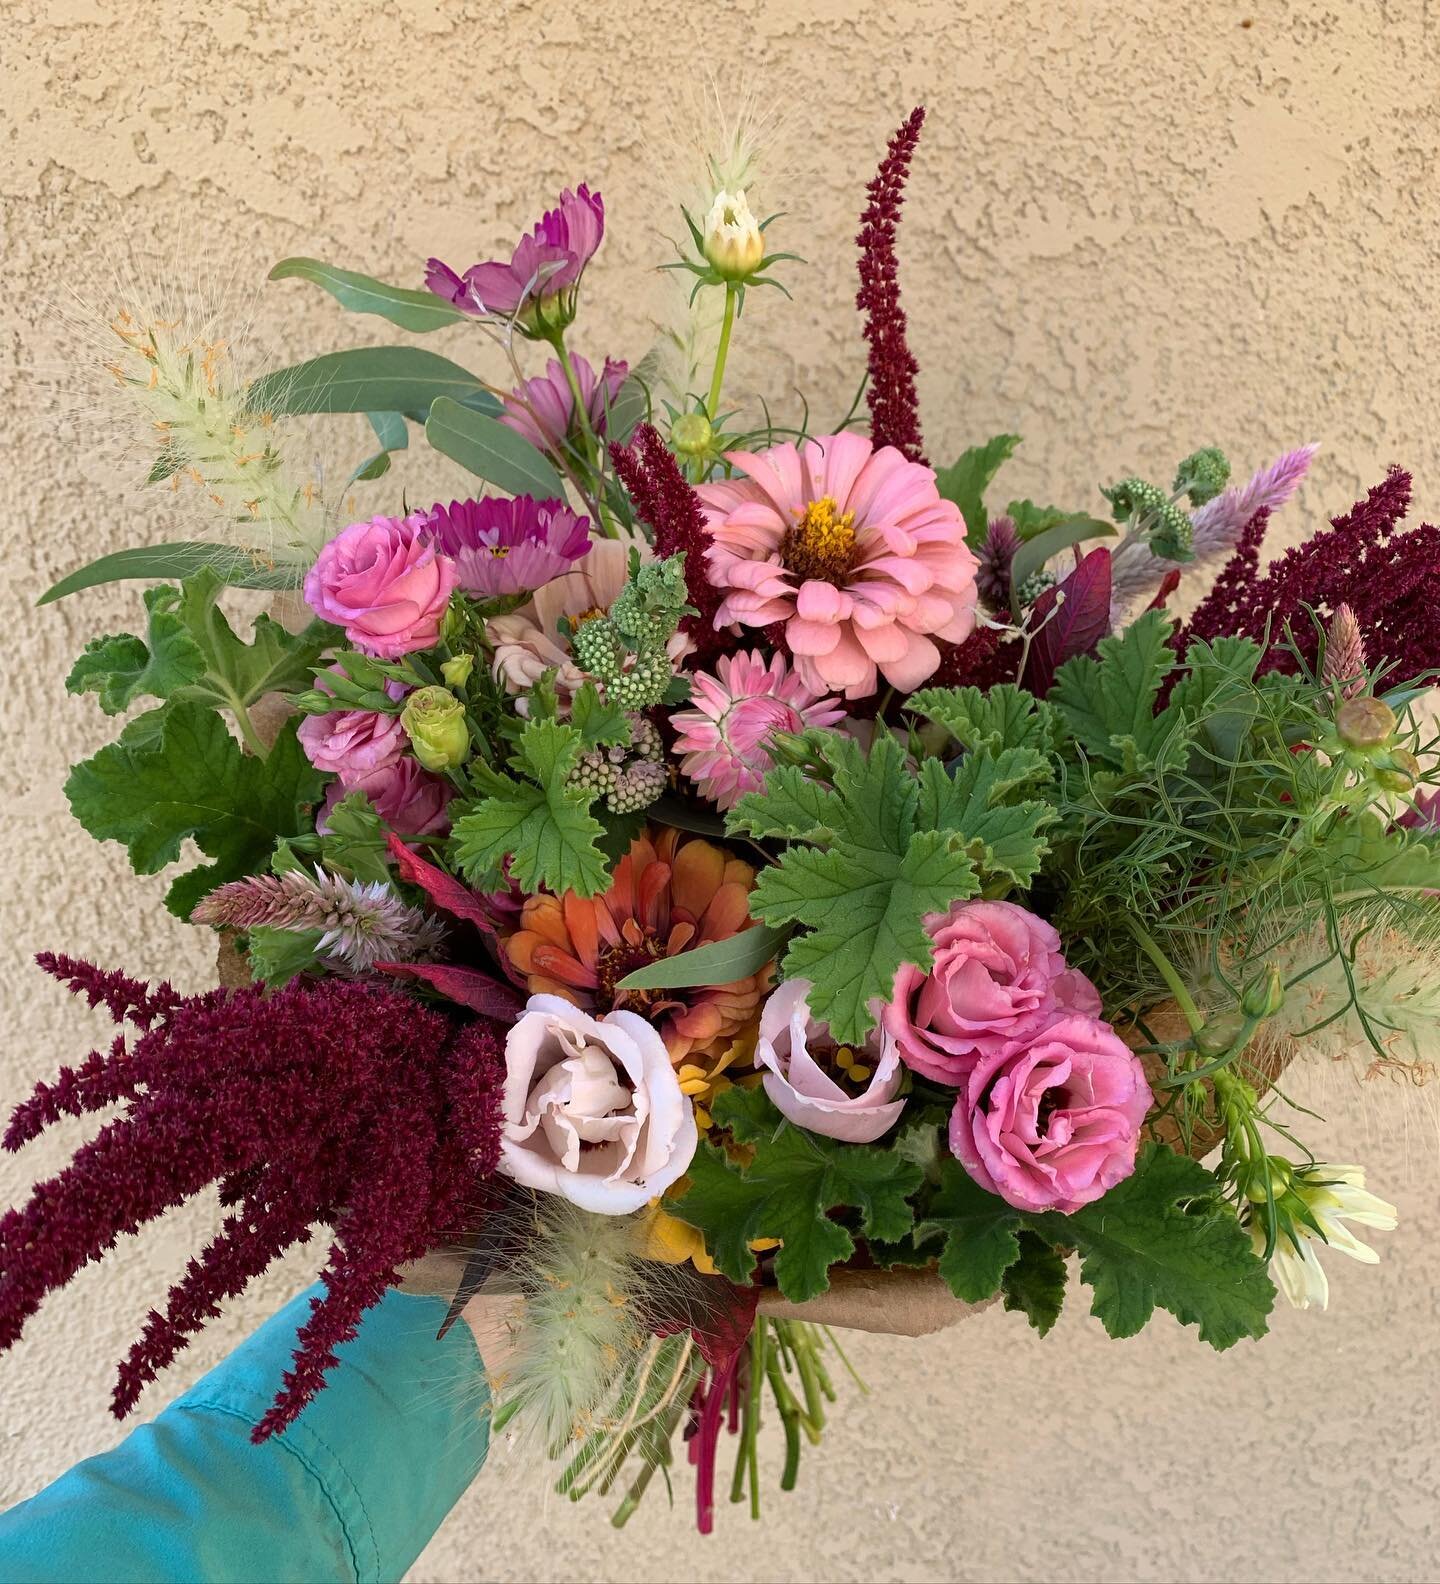 💐Flower Stand 💐

💐will be stocked this weekend Saturday &amp; Sunday morning 7am-12

💐Is located at 5725 26th st in Rio Linda

💐Is self serve. Early birds get the best pick of all the bouquets.

💐Supports our little family farm and makes me do 